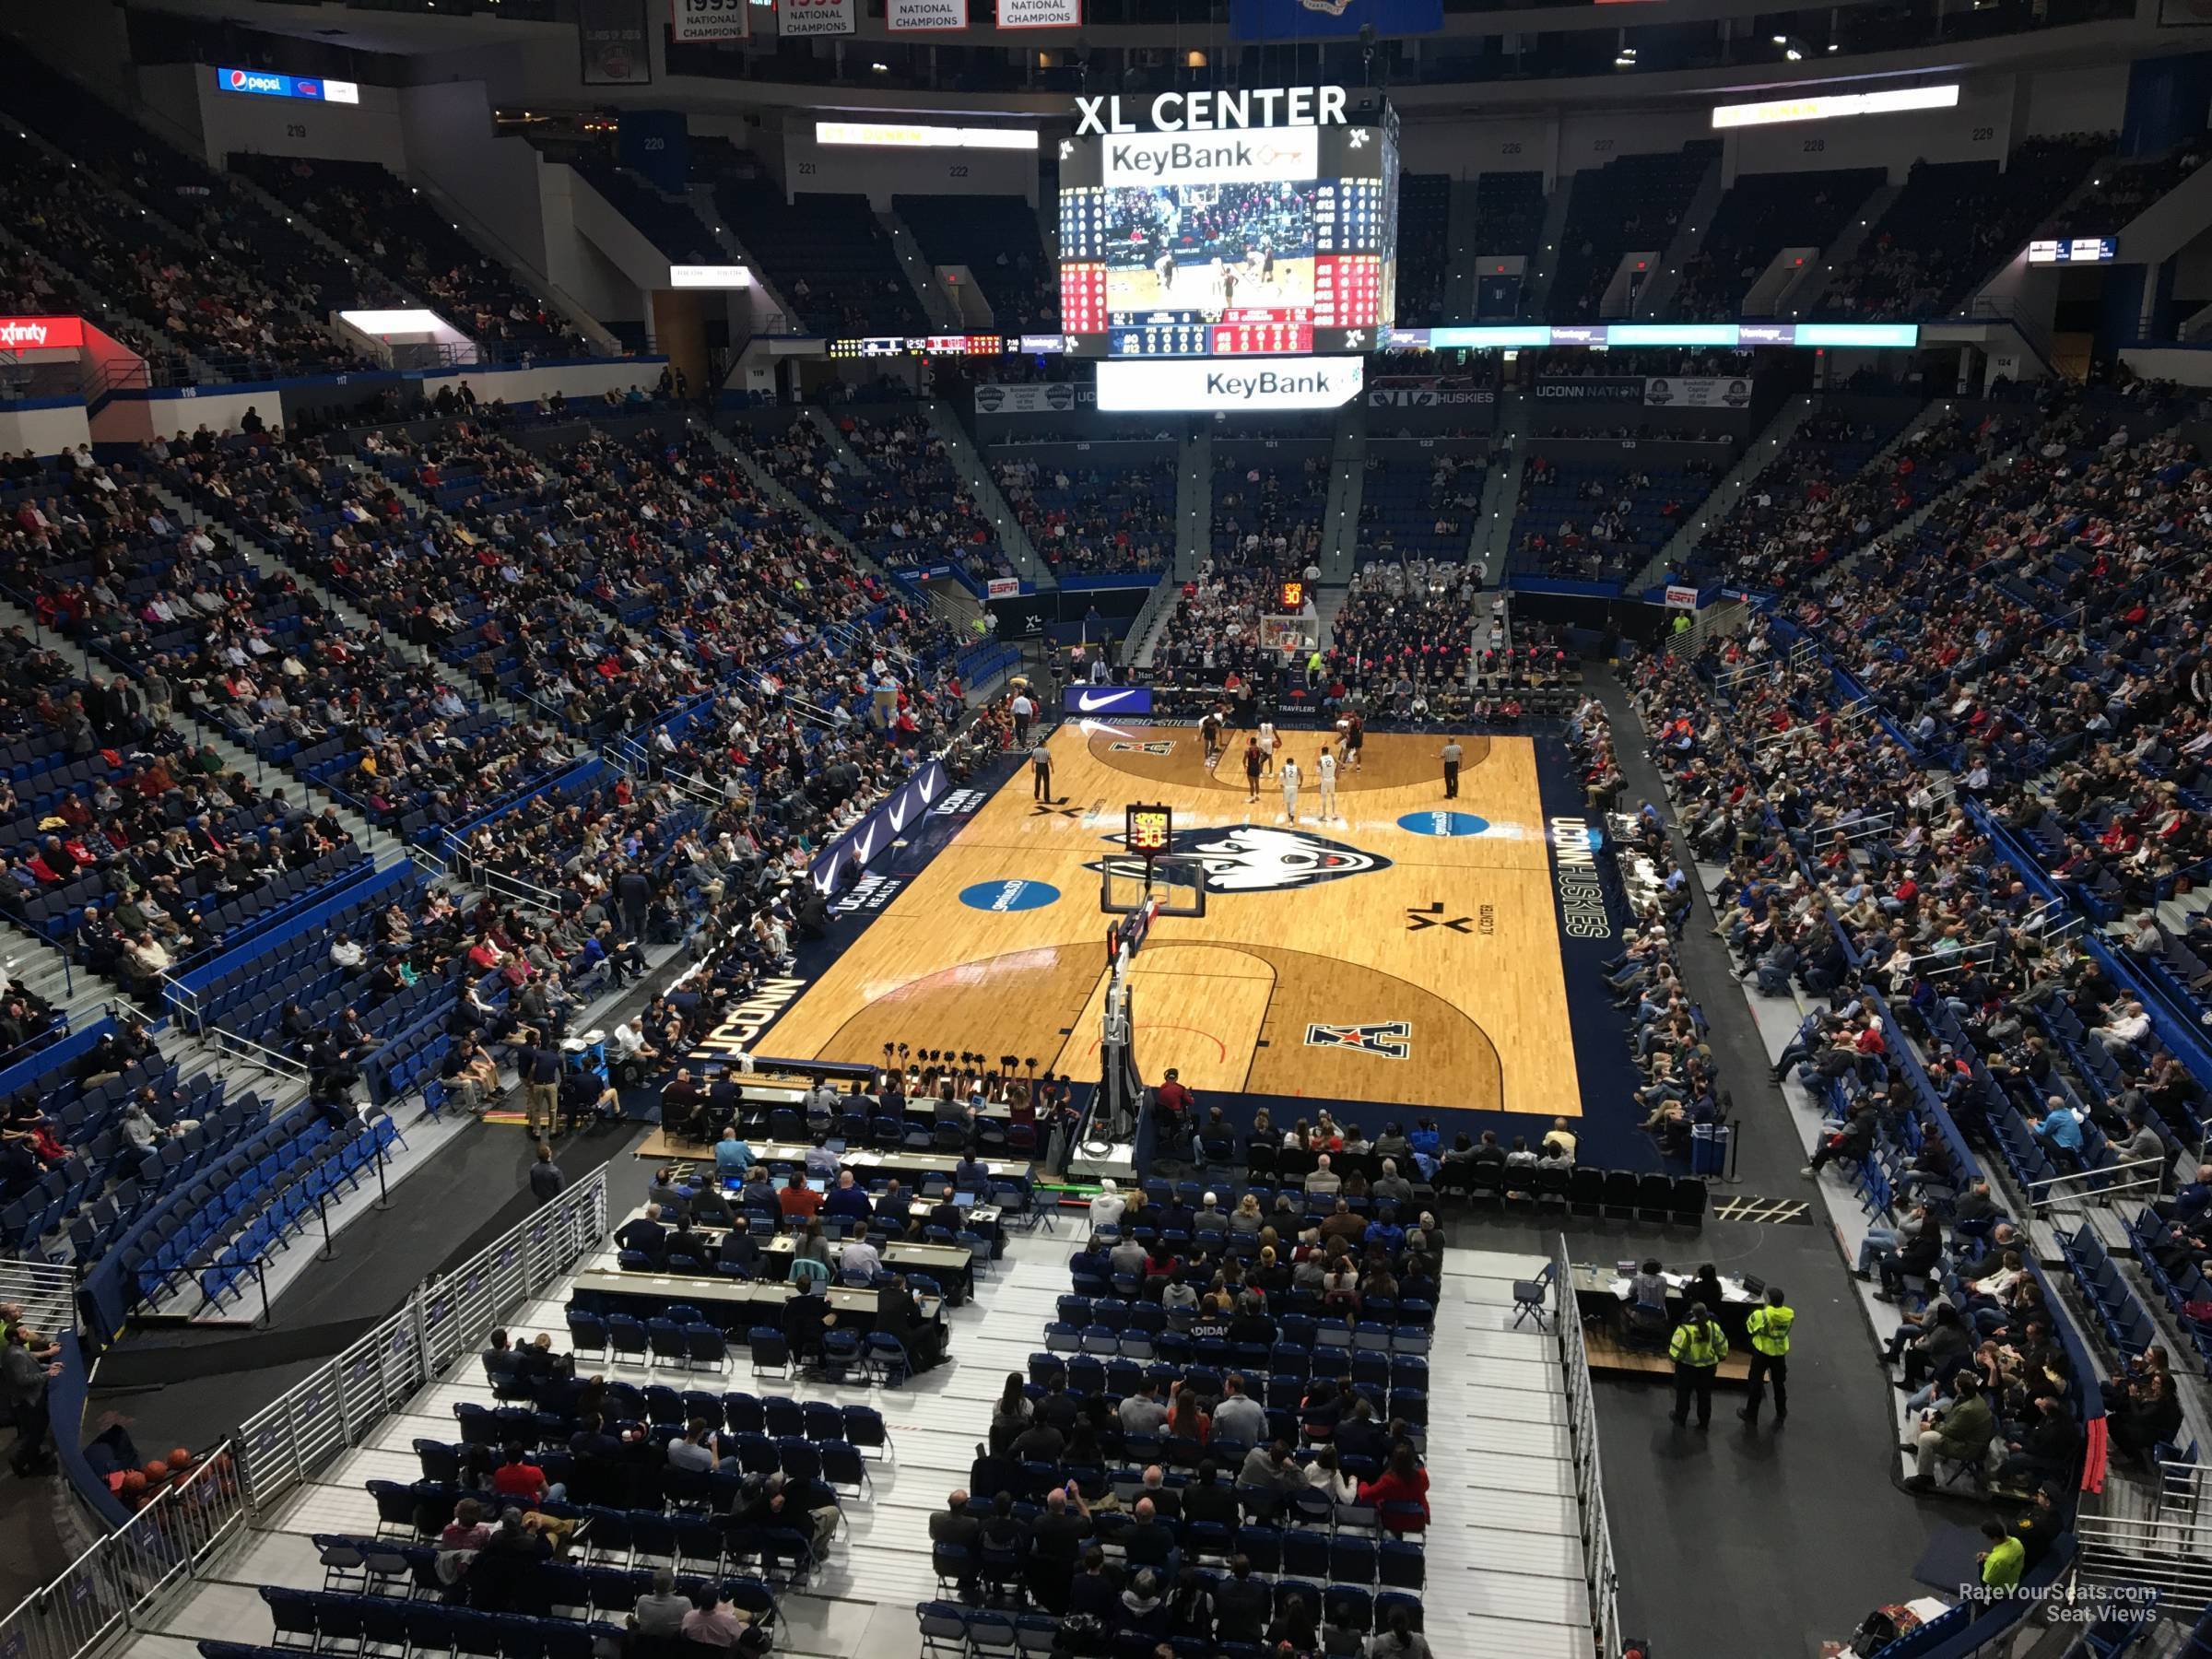 section 235, row a seat view  - xl center